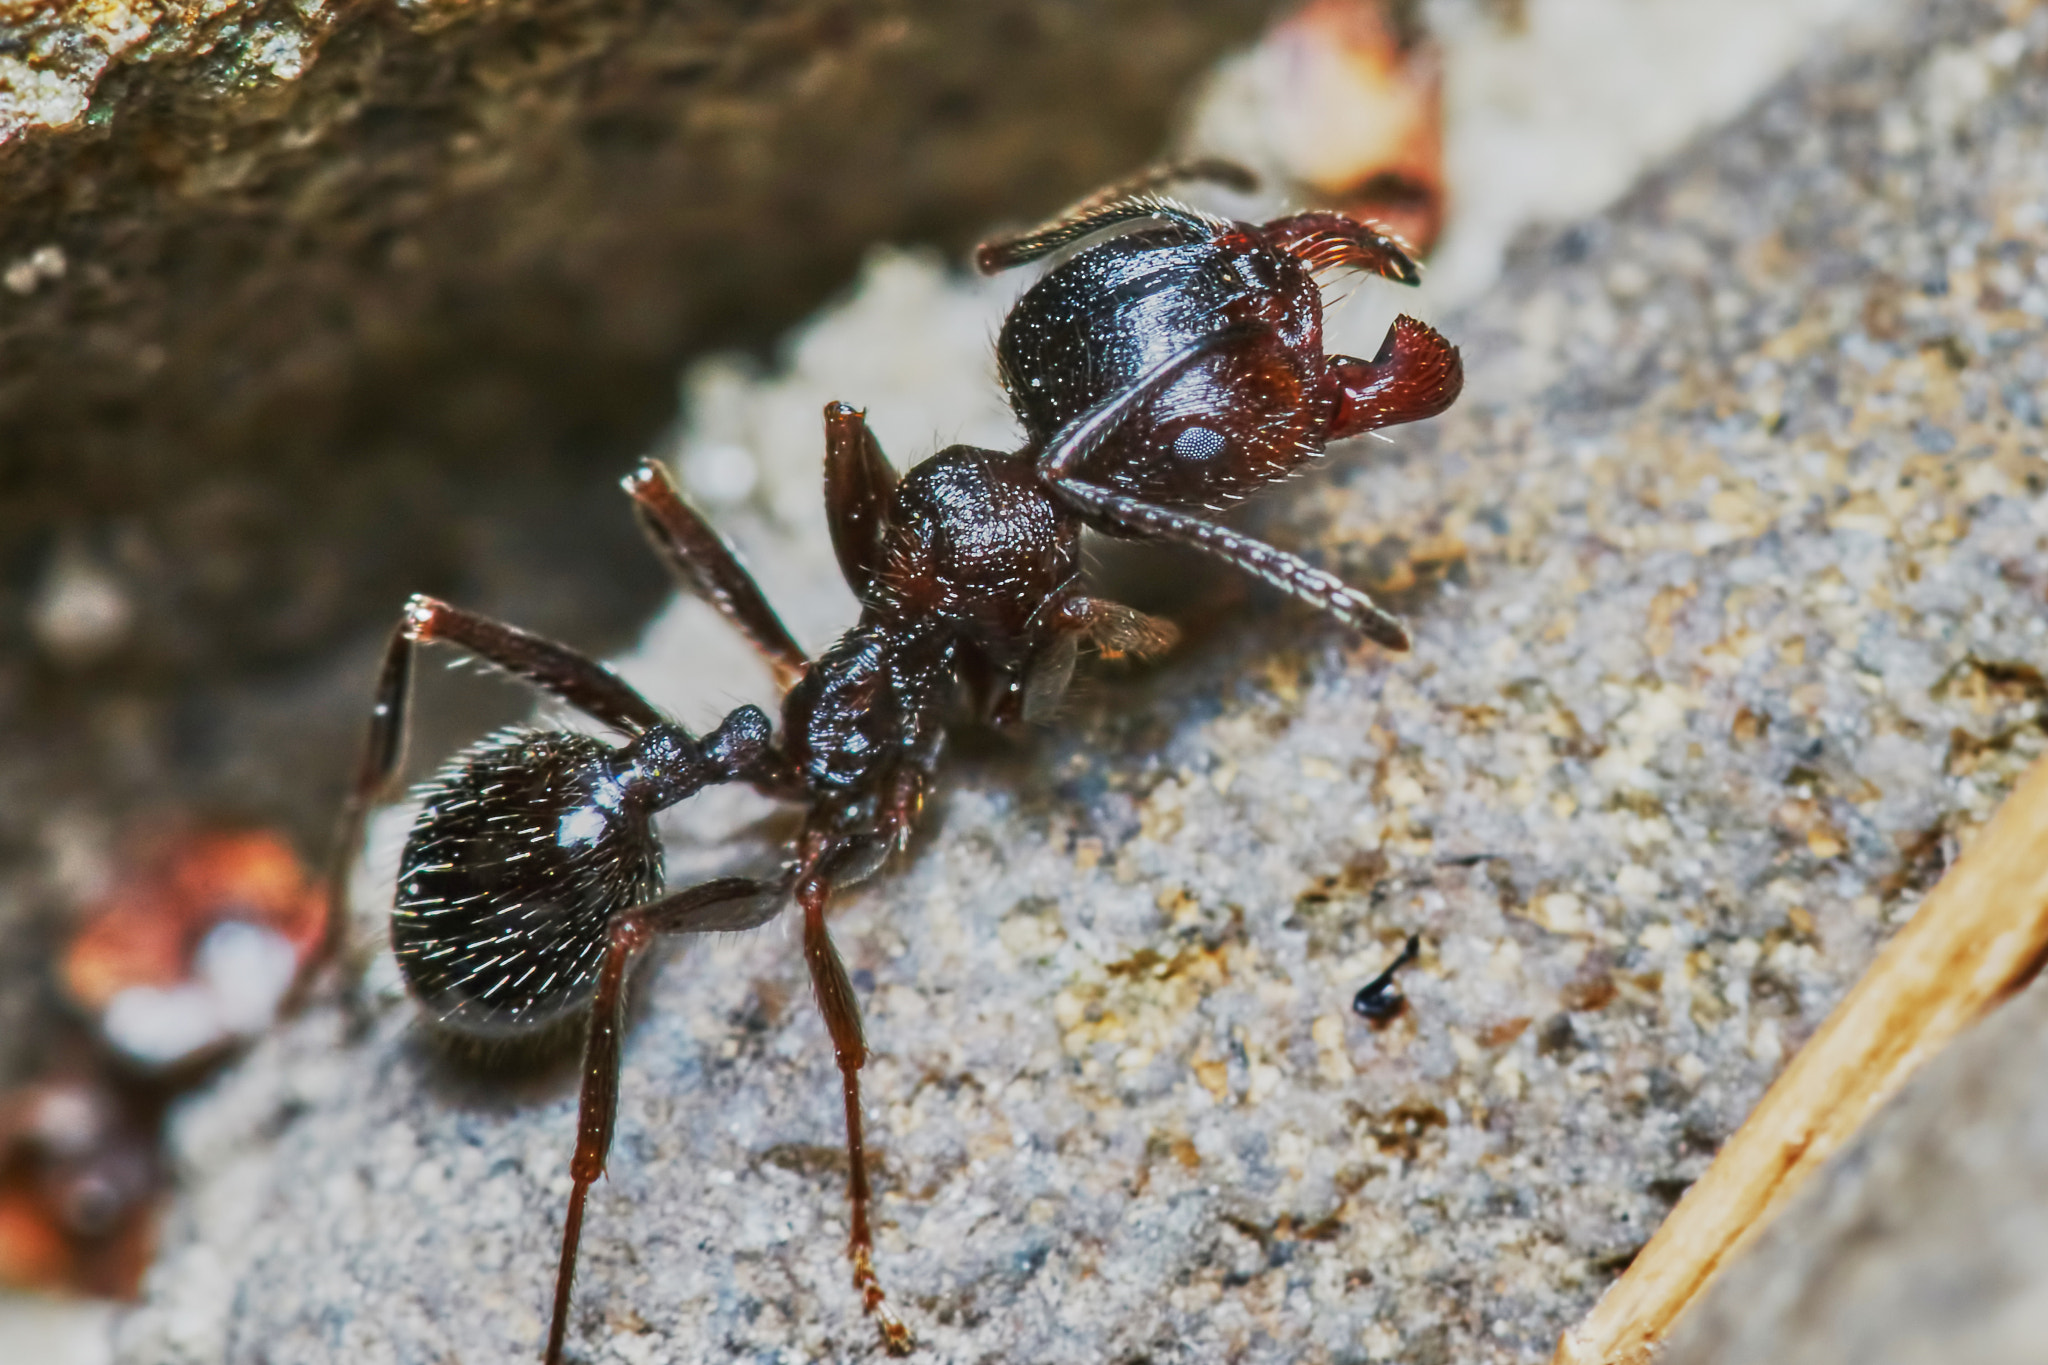 Sony a7 + Tamron SP AF 90mm F2.8 Di Macro sample photo. Ant outside in the garden photography